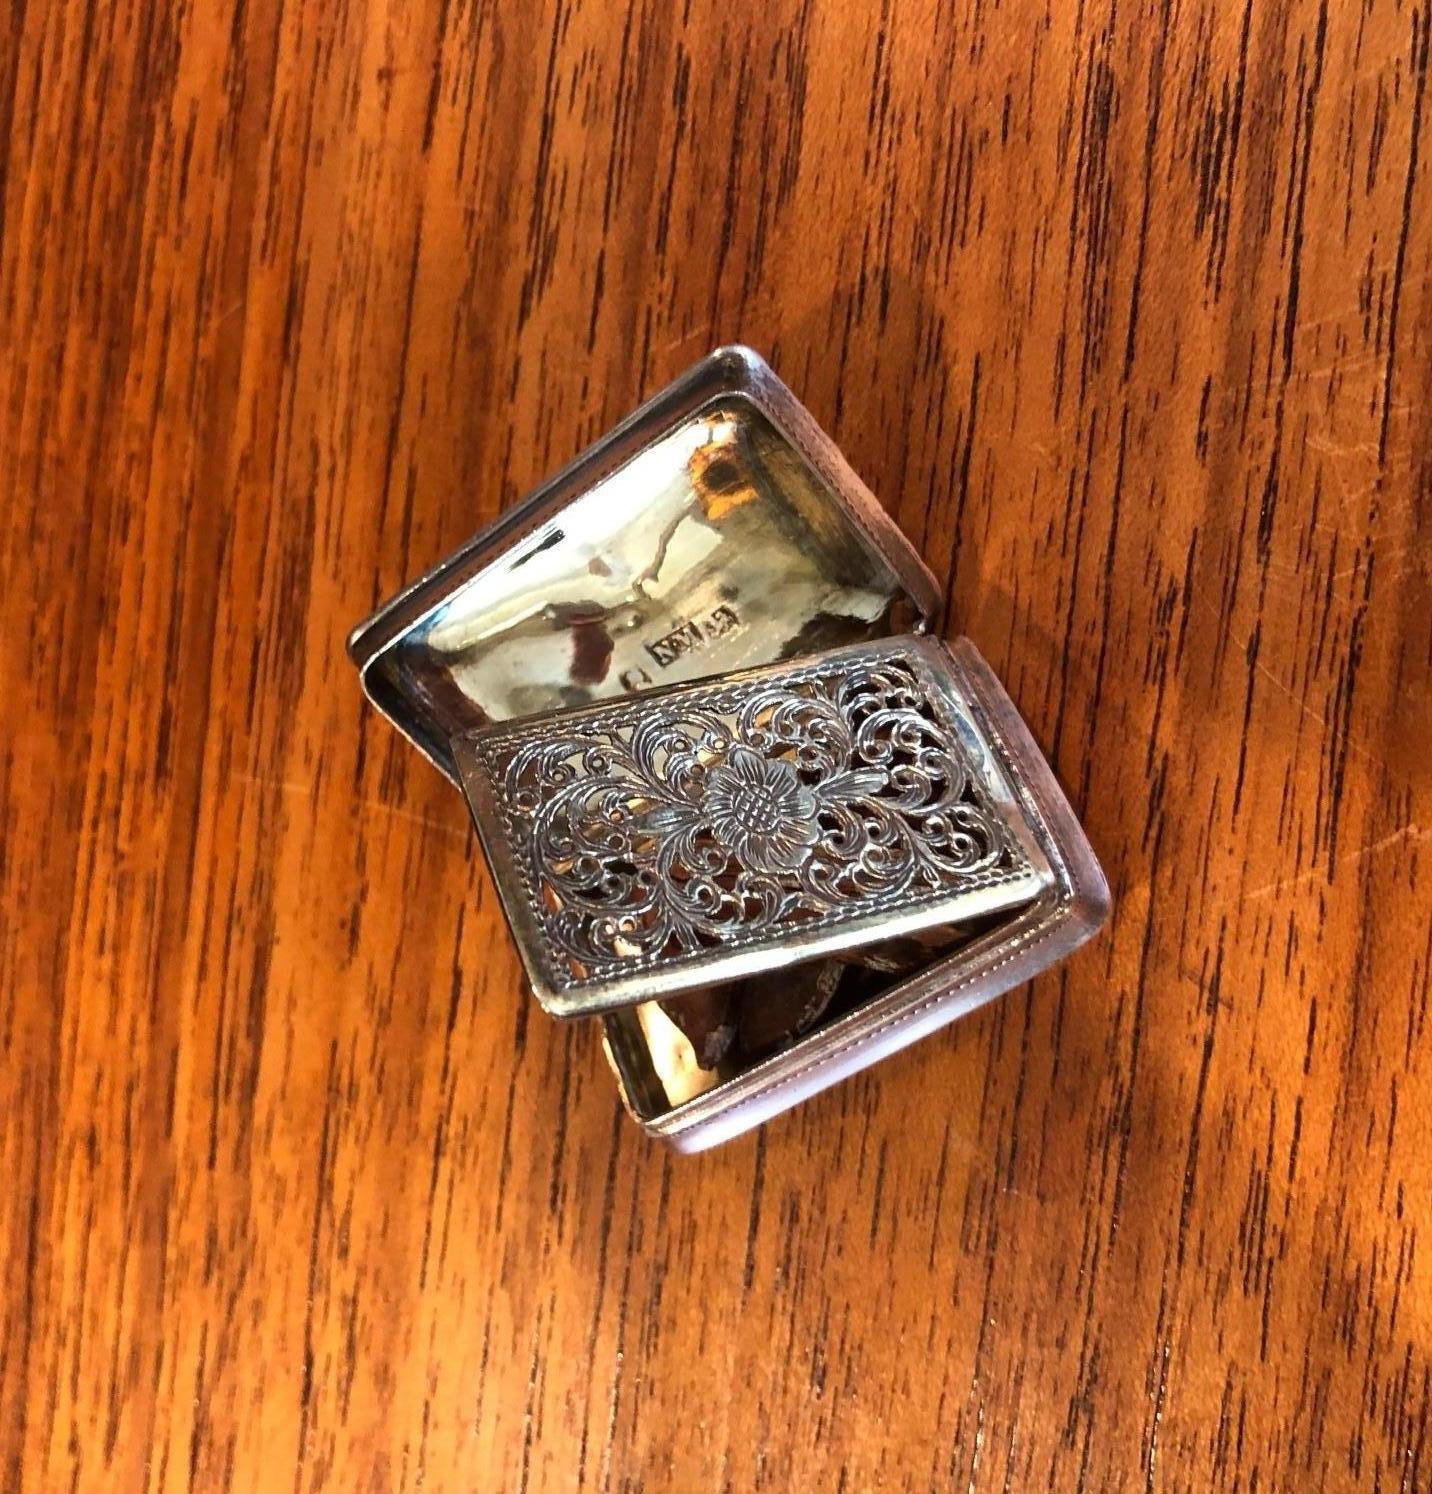 A very rare antique sterling silver viniagrette by silversmith Nathaniel Mills in Birmingham, England, circa 1820s. 

This exceptional antique Georgian silver vinaigrette has a rectangular form with rounded corners; the lid, on a smooth barrel